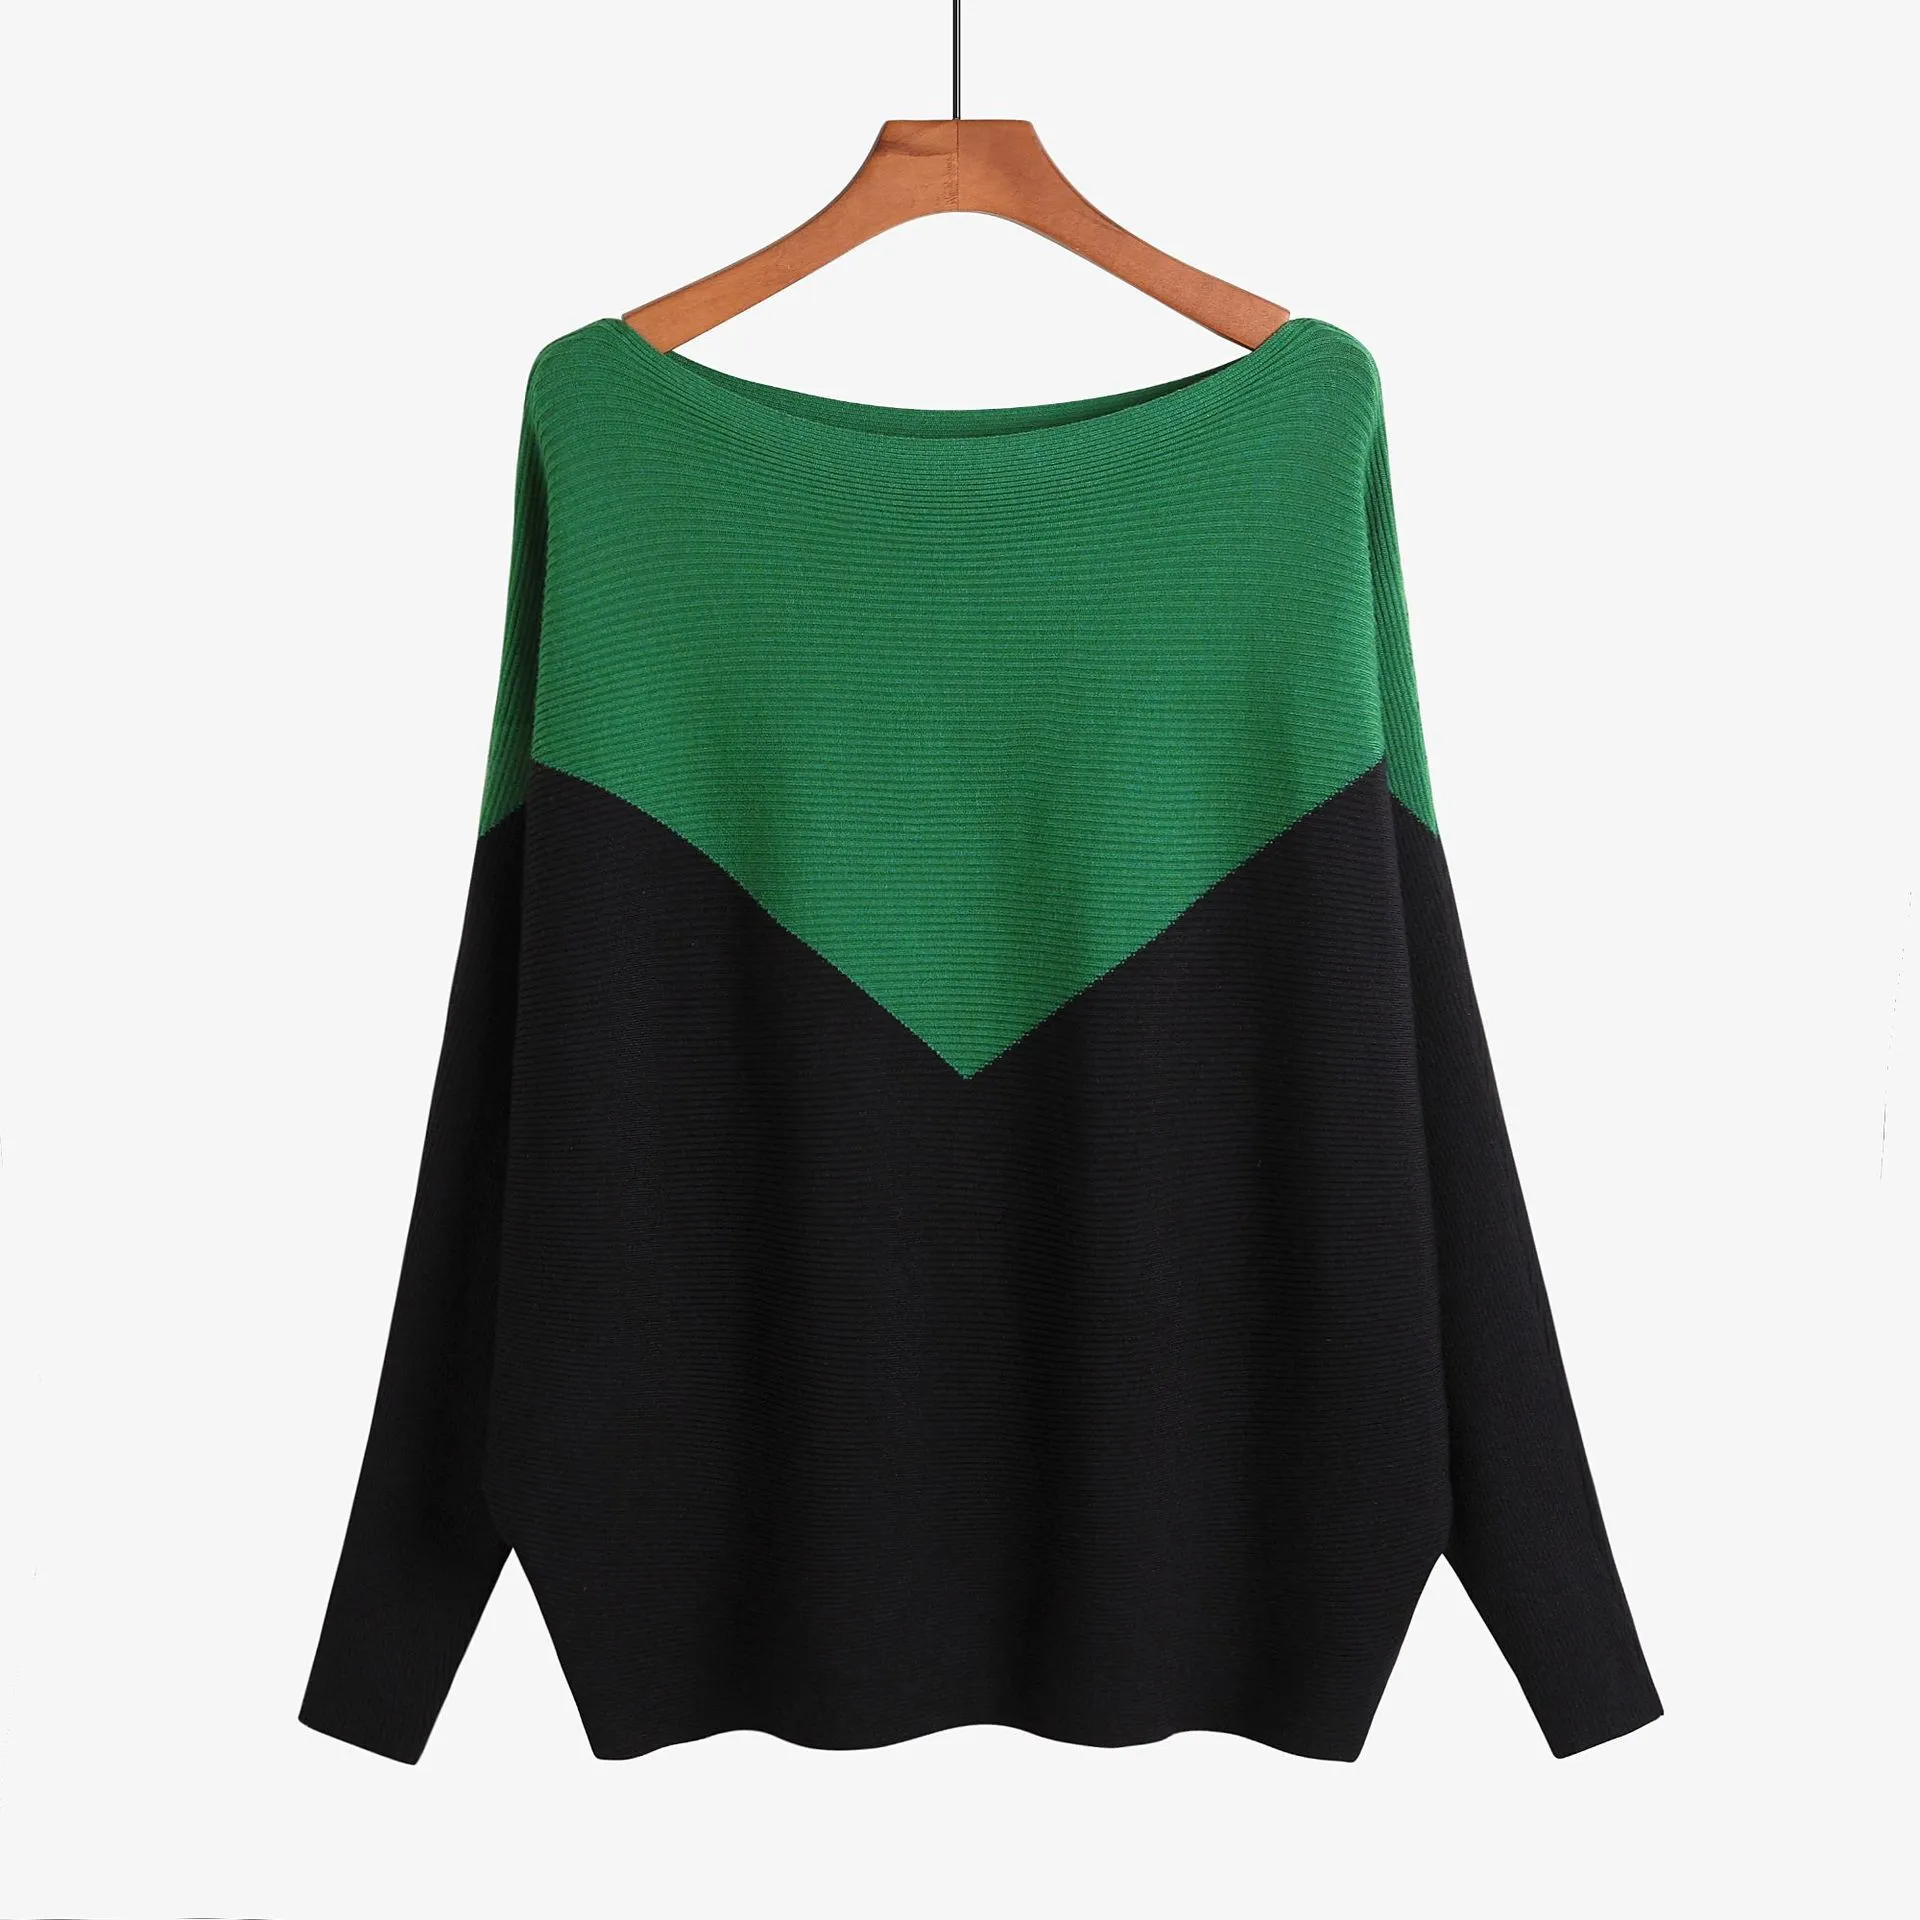 Loose Knitted Sweater Women Jumpers Long Sleeve o-neck Woman Pullovers Sweater Autumn Winter Color Block Casual Sweater 201224